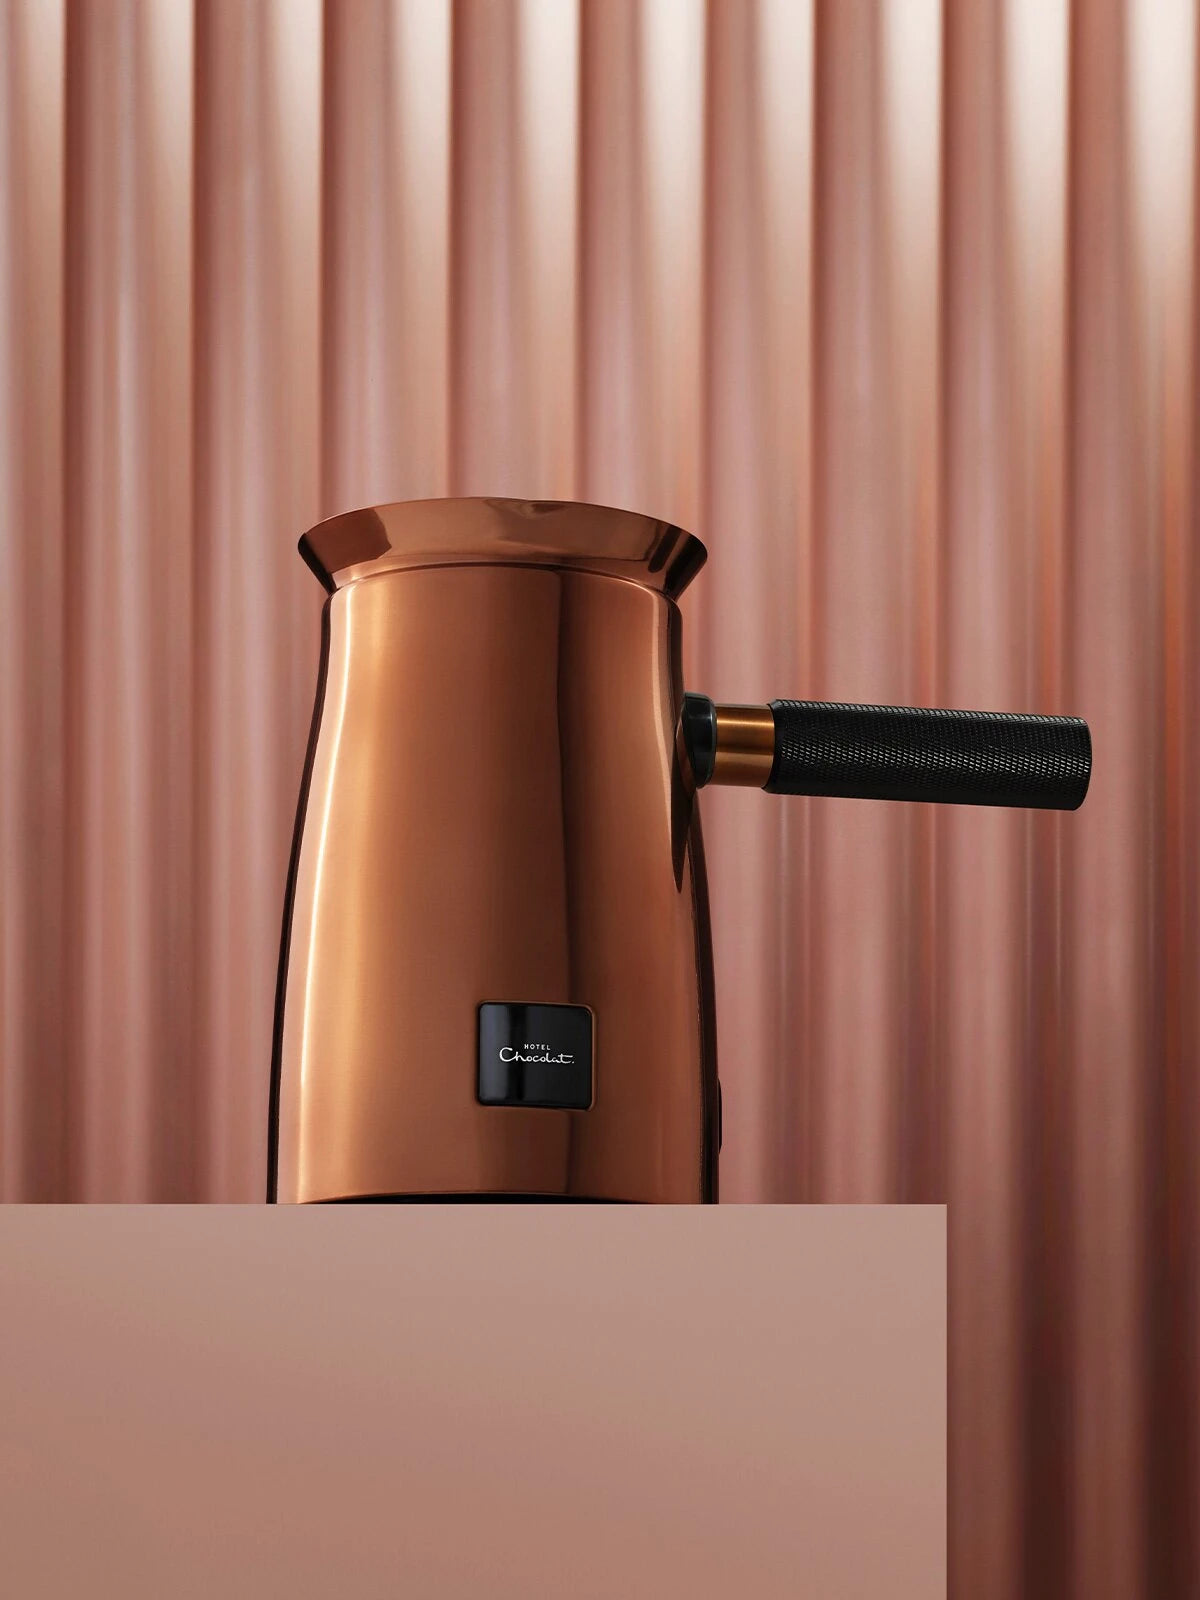 Image of Hotel Chocolat Velvetiser, copper coloured with black handle. Stands on a plinth. Hotel Chocolat Velvetiser. 